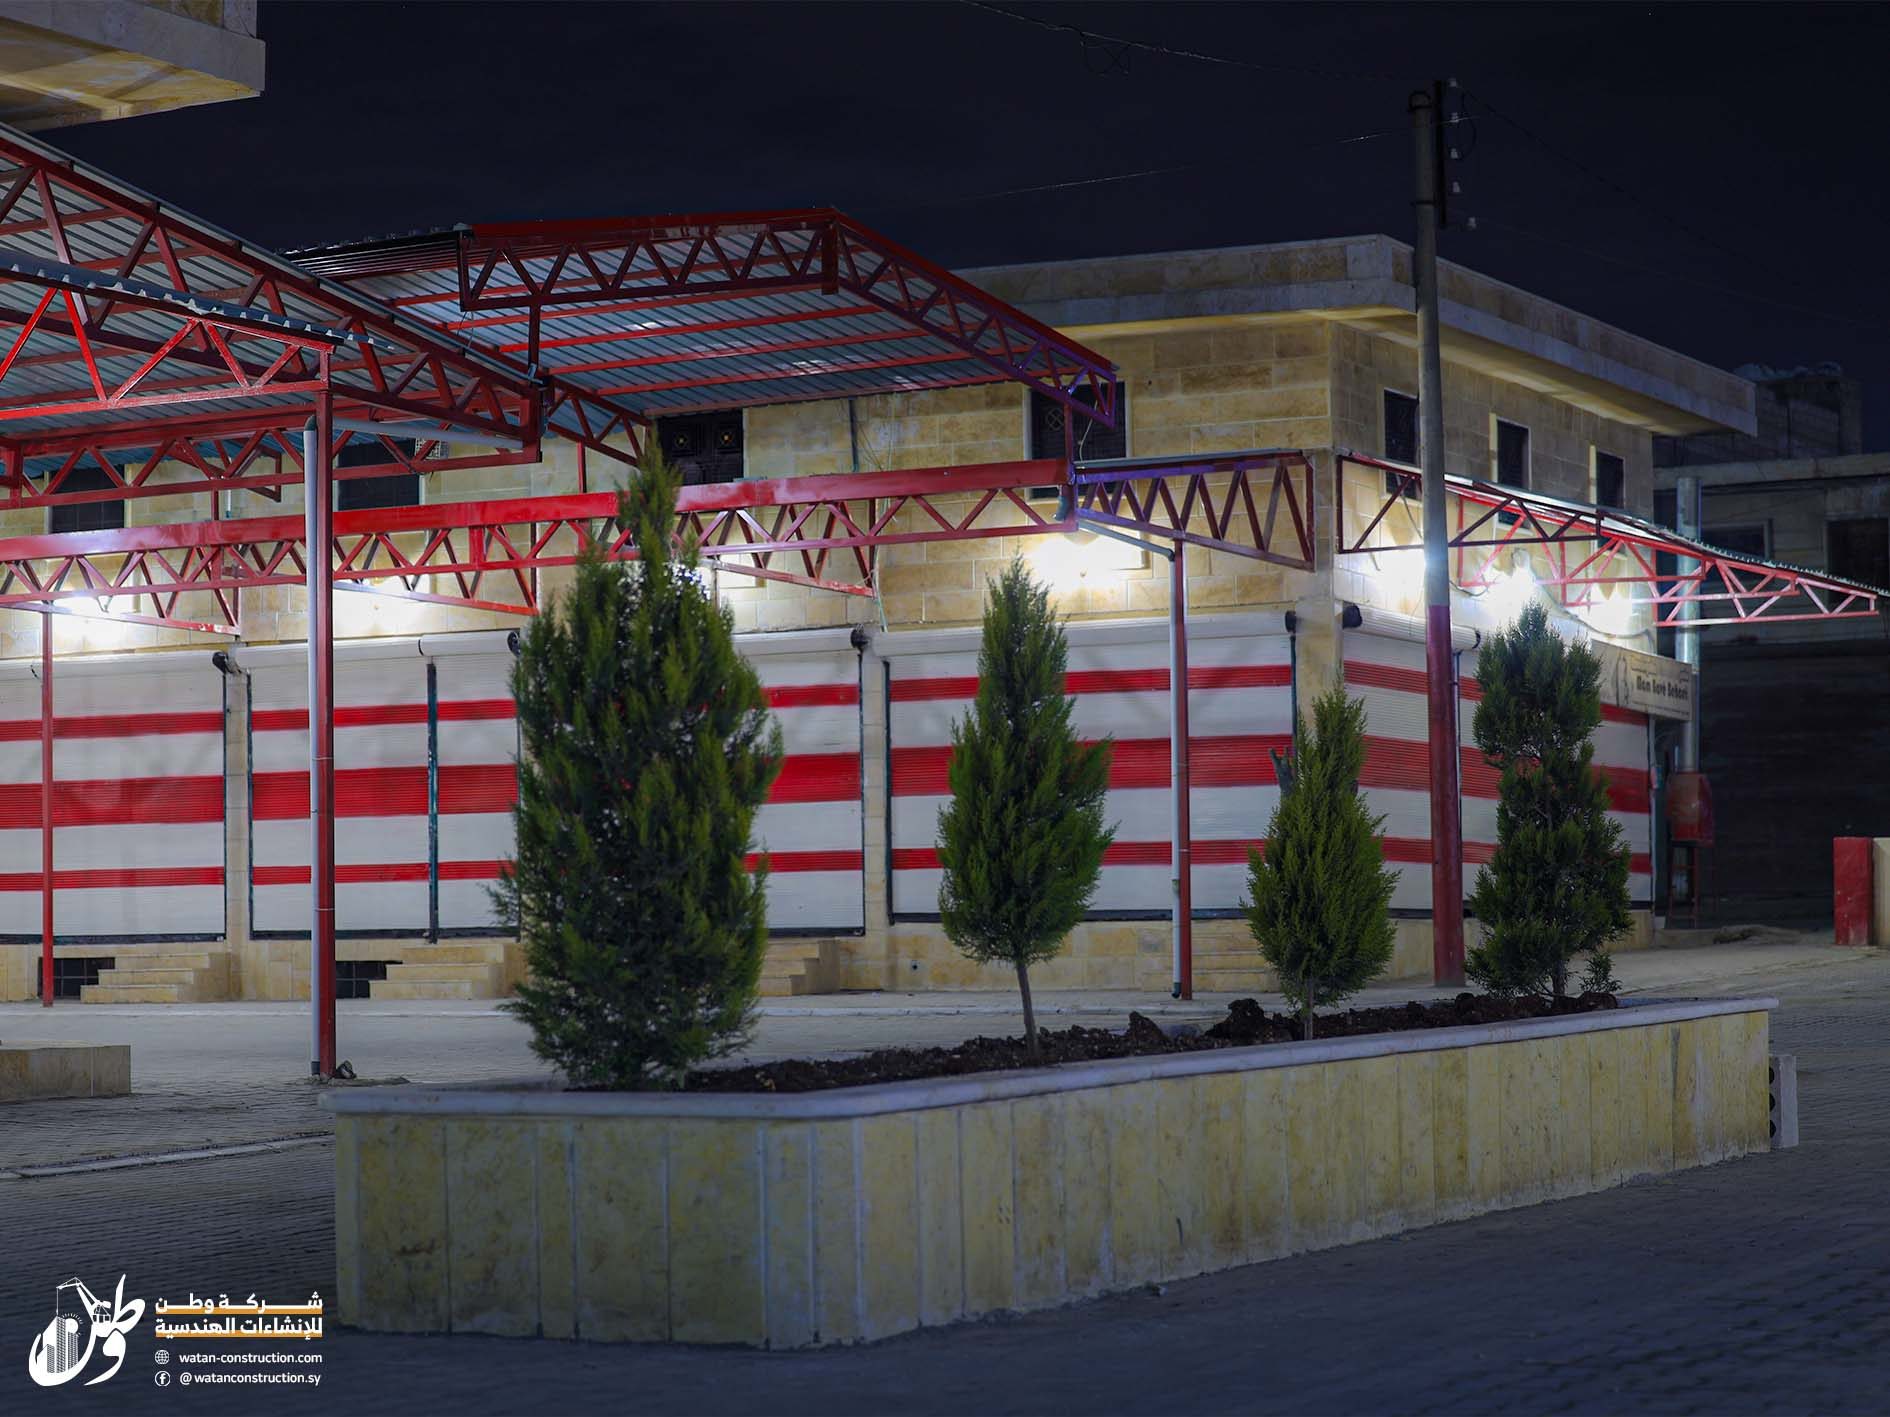 Night photos of the oil and grain market in Afrin5